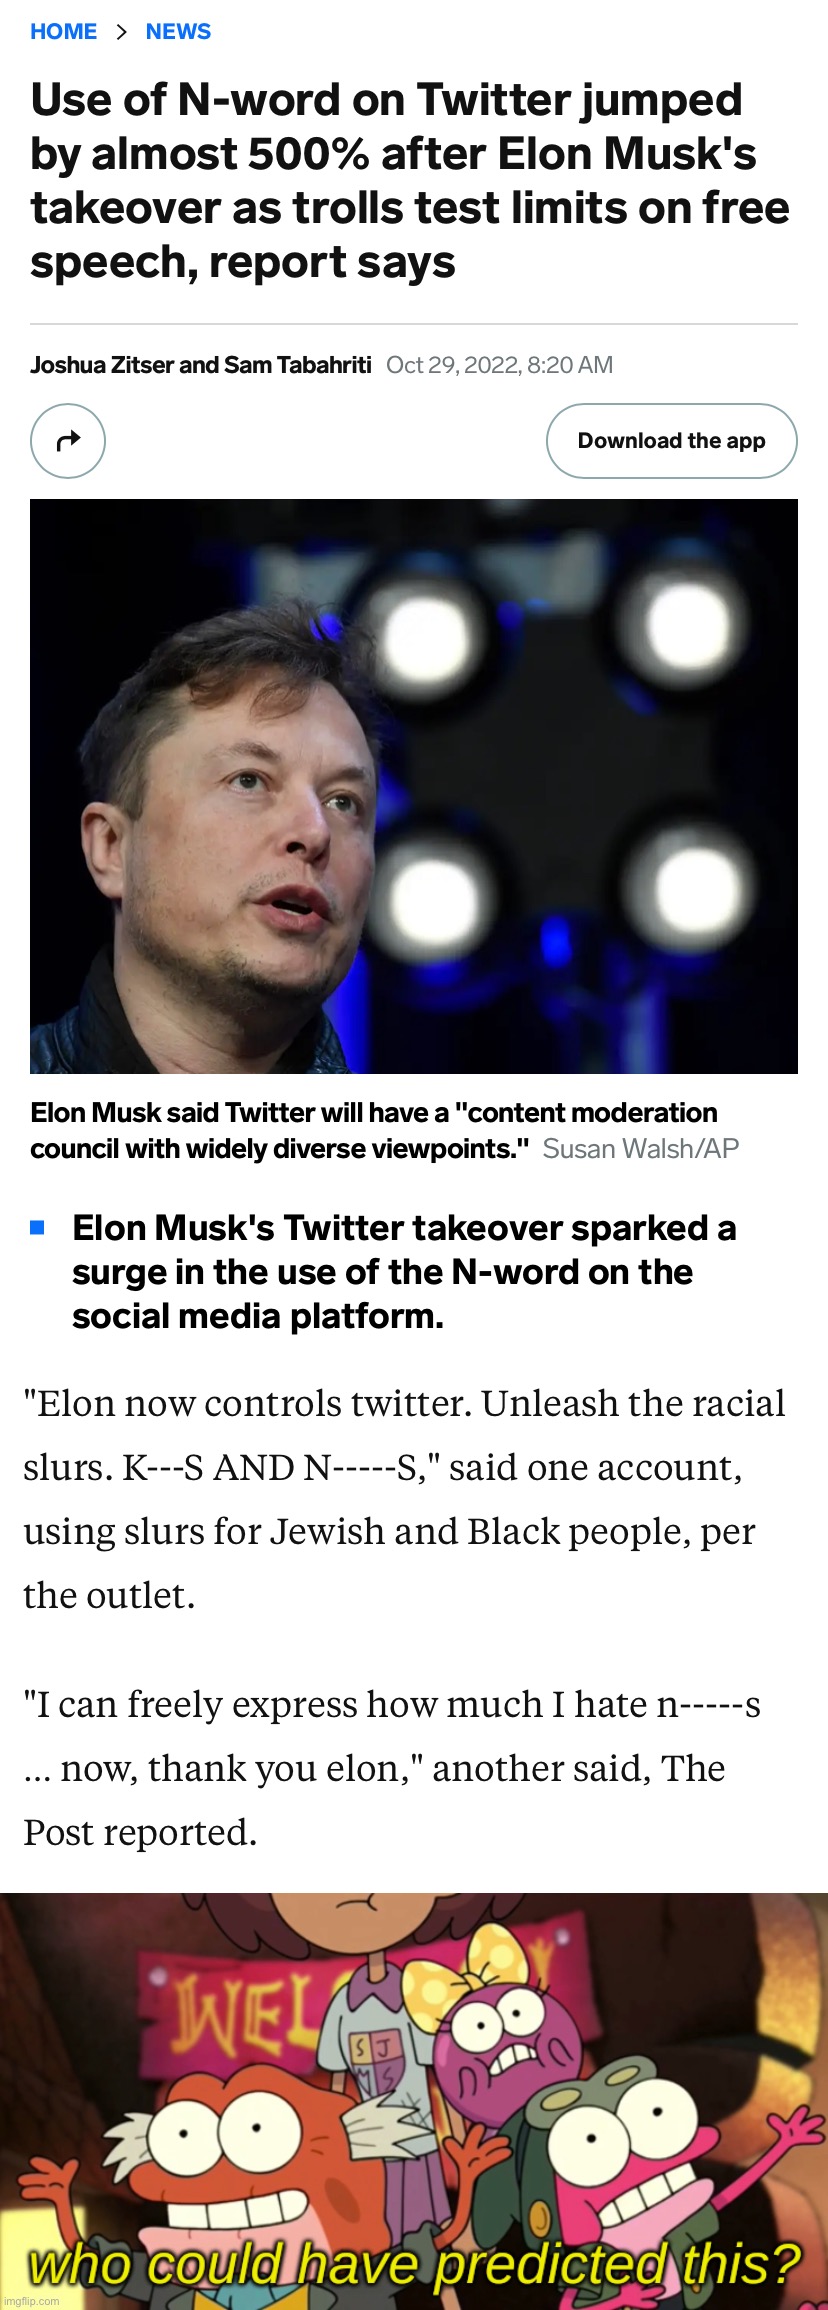 Use of n-word spikes under initial tenure of the son of a South African emerald mine owner. Crazy | image tagged in n-word usage jumps on twitter,who could have predicted this,racism,elon musk,twitter,elon musk buying twitter | made w/ Imgflip meme maker